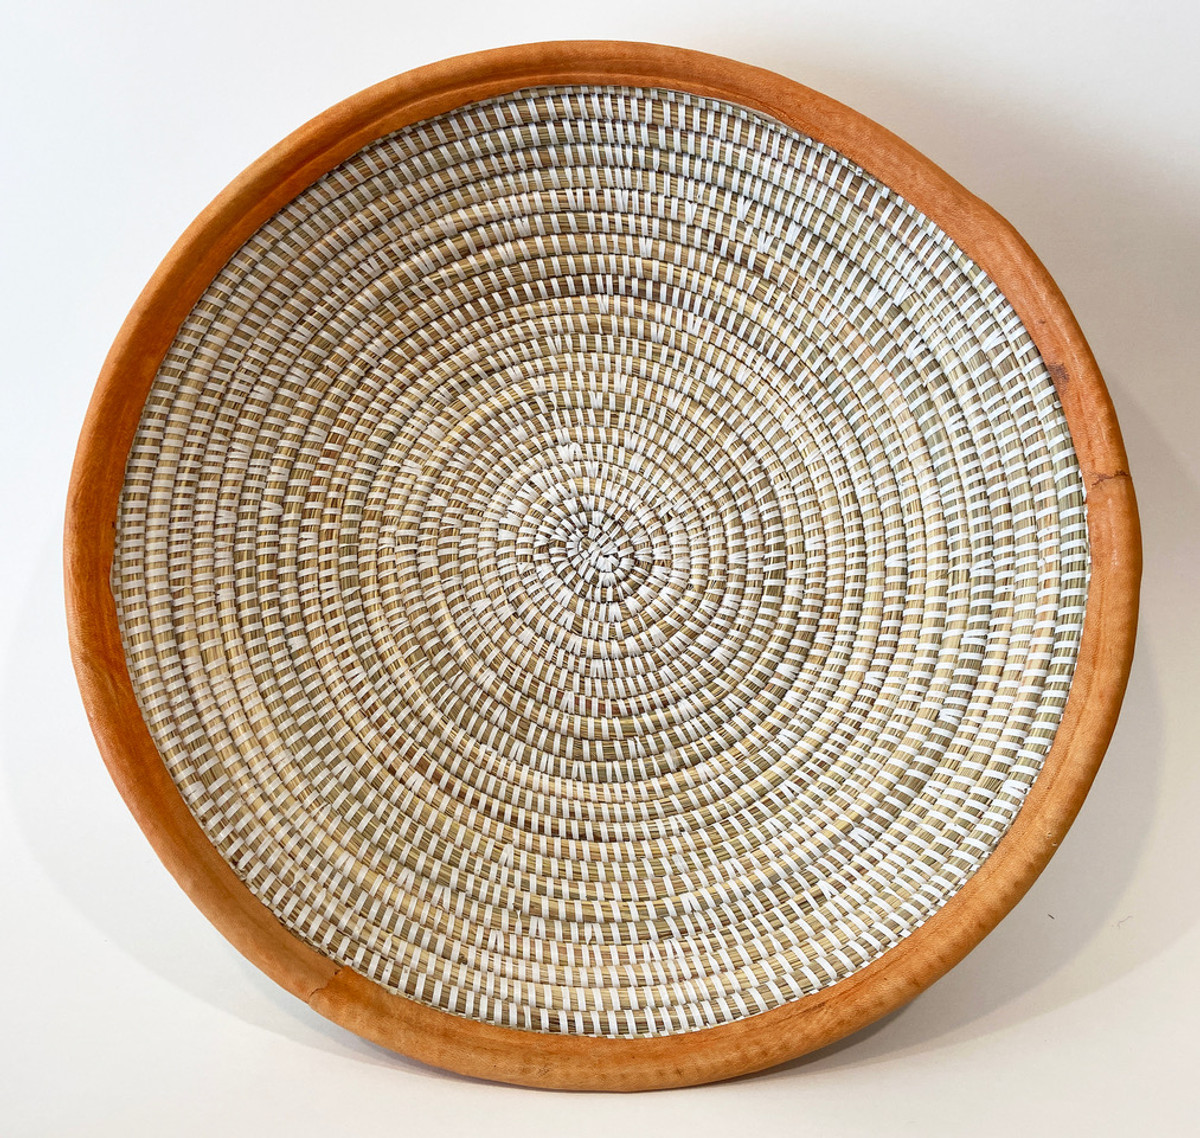 Handwoven Grass Basket Senegal (16" across) grasses, and strips of white recycled prayer mats and chalky saffron colored leather trim.